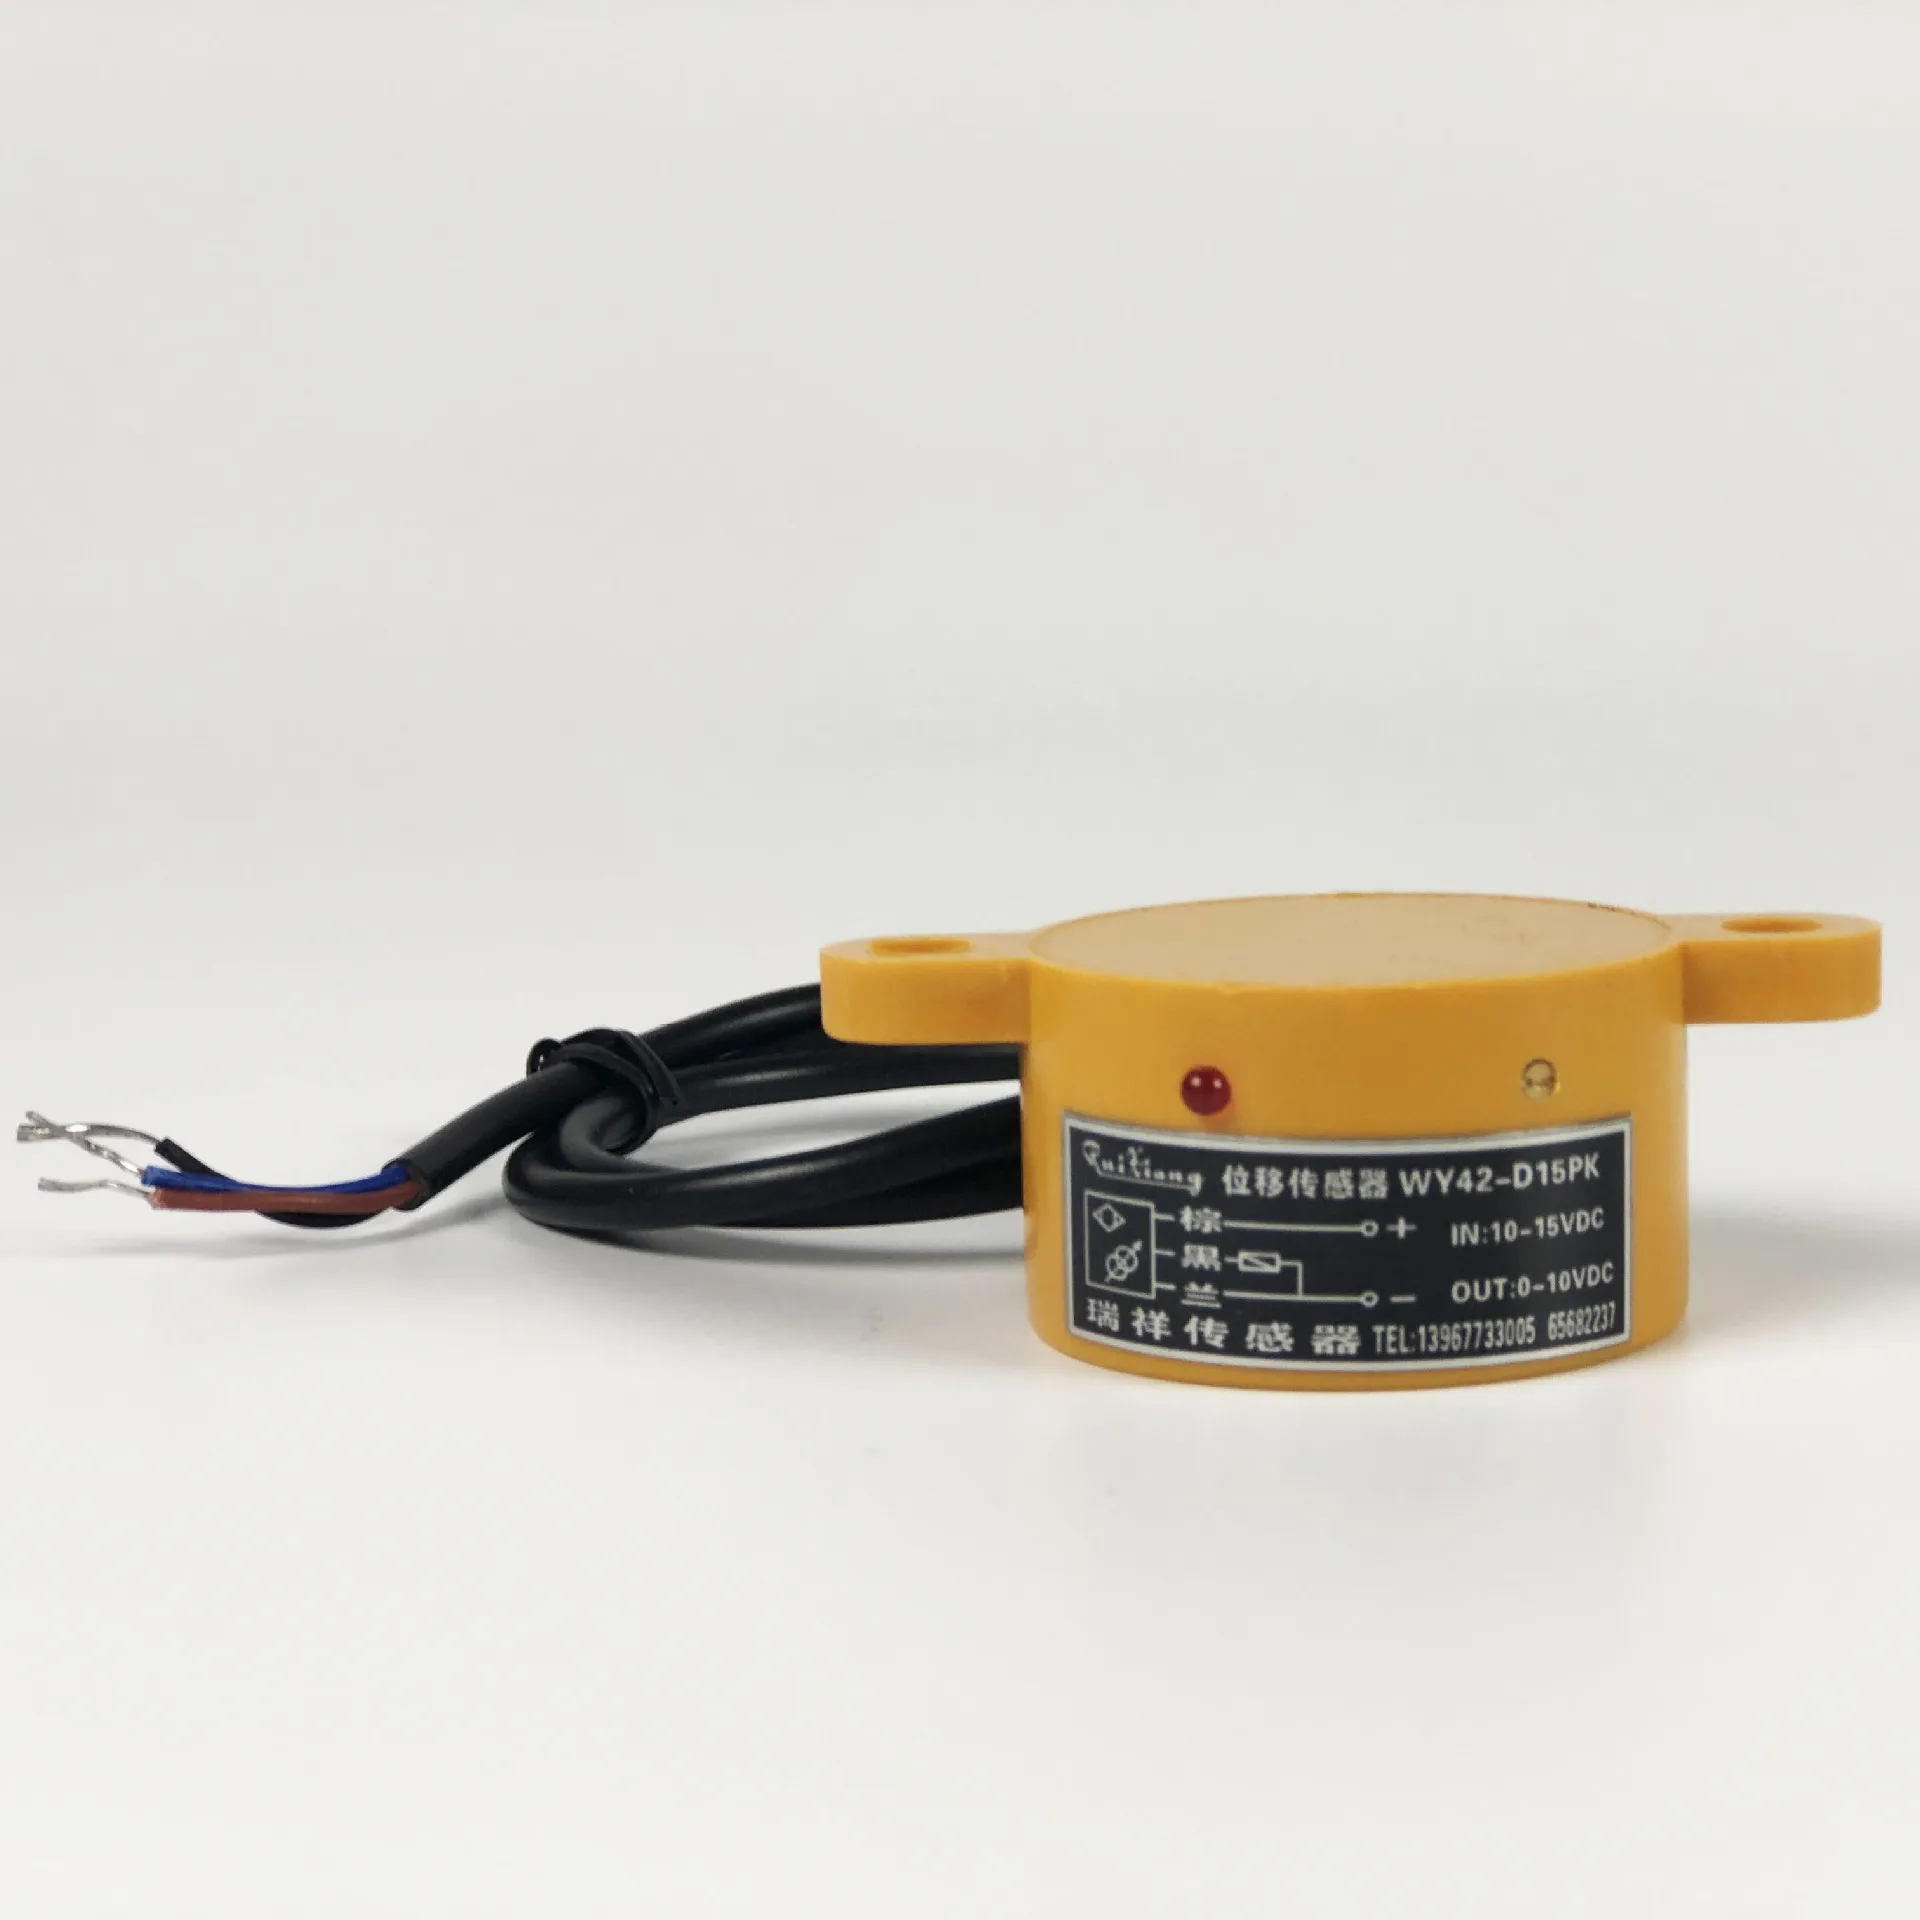 WY42-D15PK Yellow Displacement Sensor, Bag Making Machine and Other Feeding Displacement Switch Sensor miran lvdt20 self return sensor type a size rs485 digital output rebound lvdt displacement transducer linear position sensor